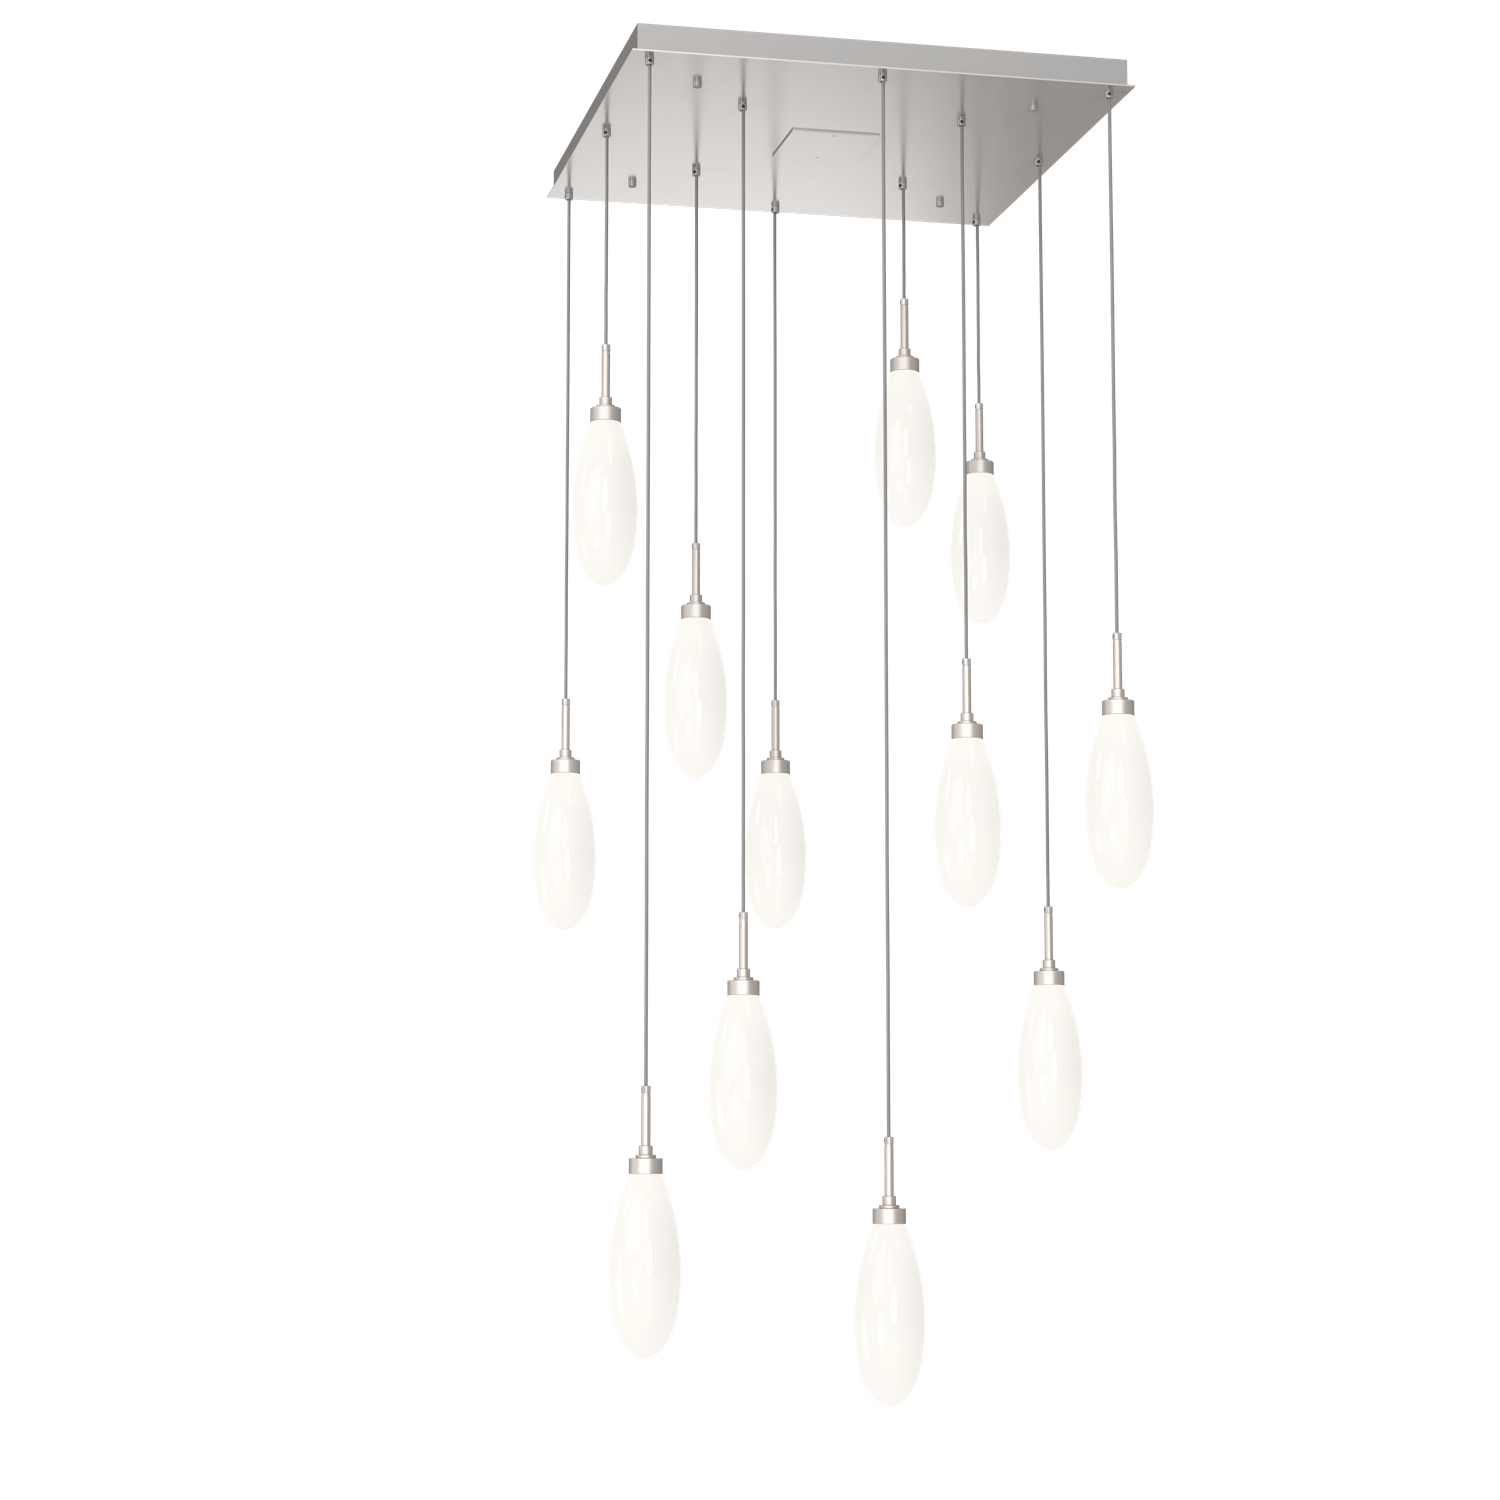 CHB0071-12-BS-WL-LL-Hammerton-Studio-Fiori-12-light-square-pendant-chandelier-with-metallic-beige-silver-finish-and-opal-white-glass-shades-and-LED-lamping